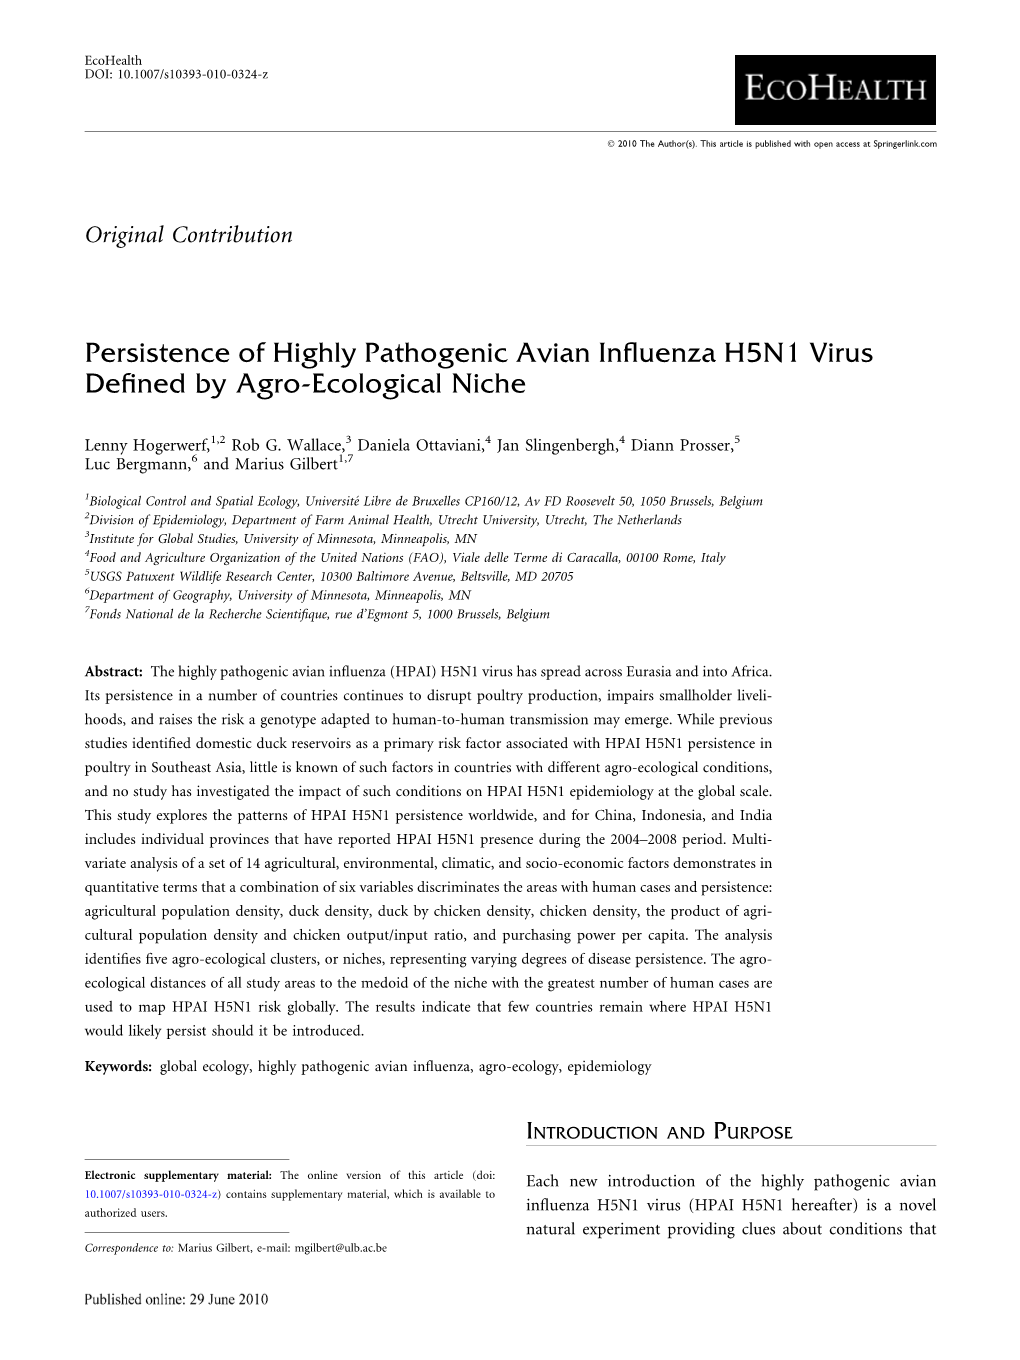 Persistence of Highly Pathogenic Avian Influenza H5N1 Virus Defined by Agro-Ecological Niche